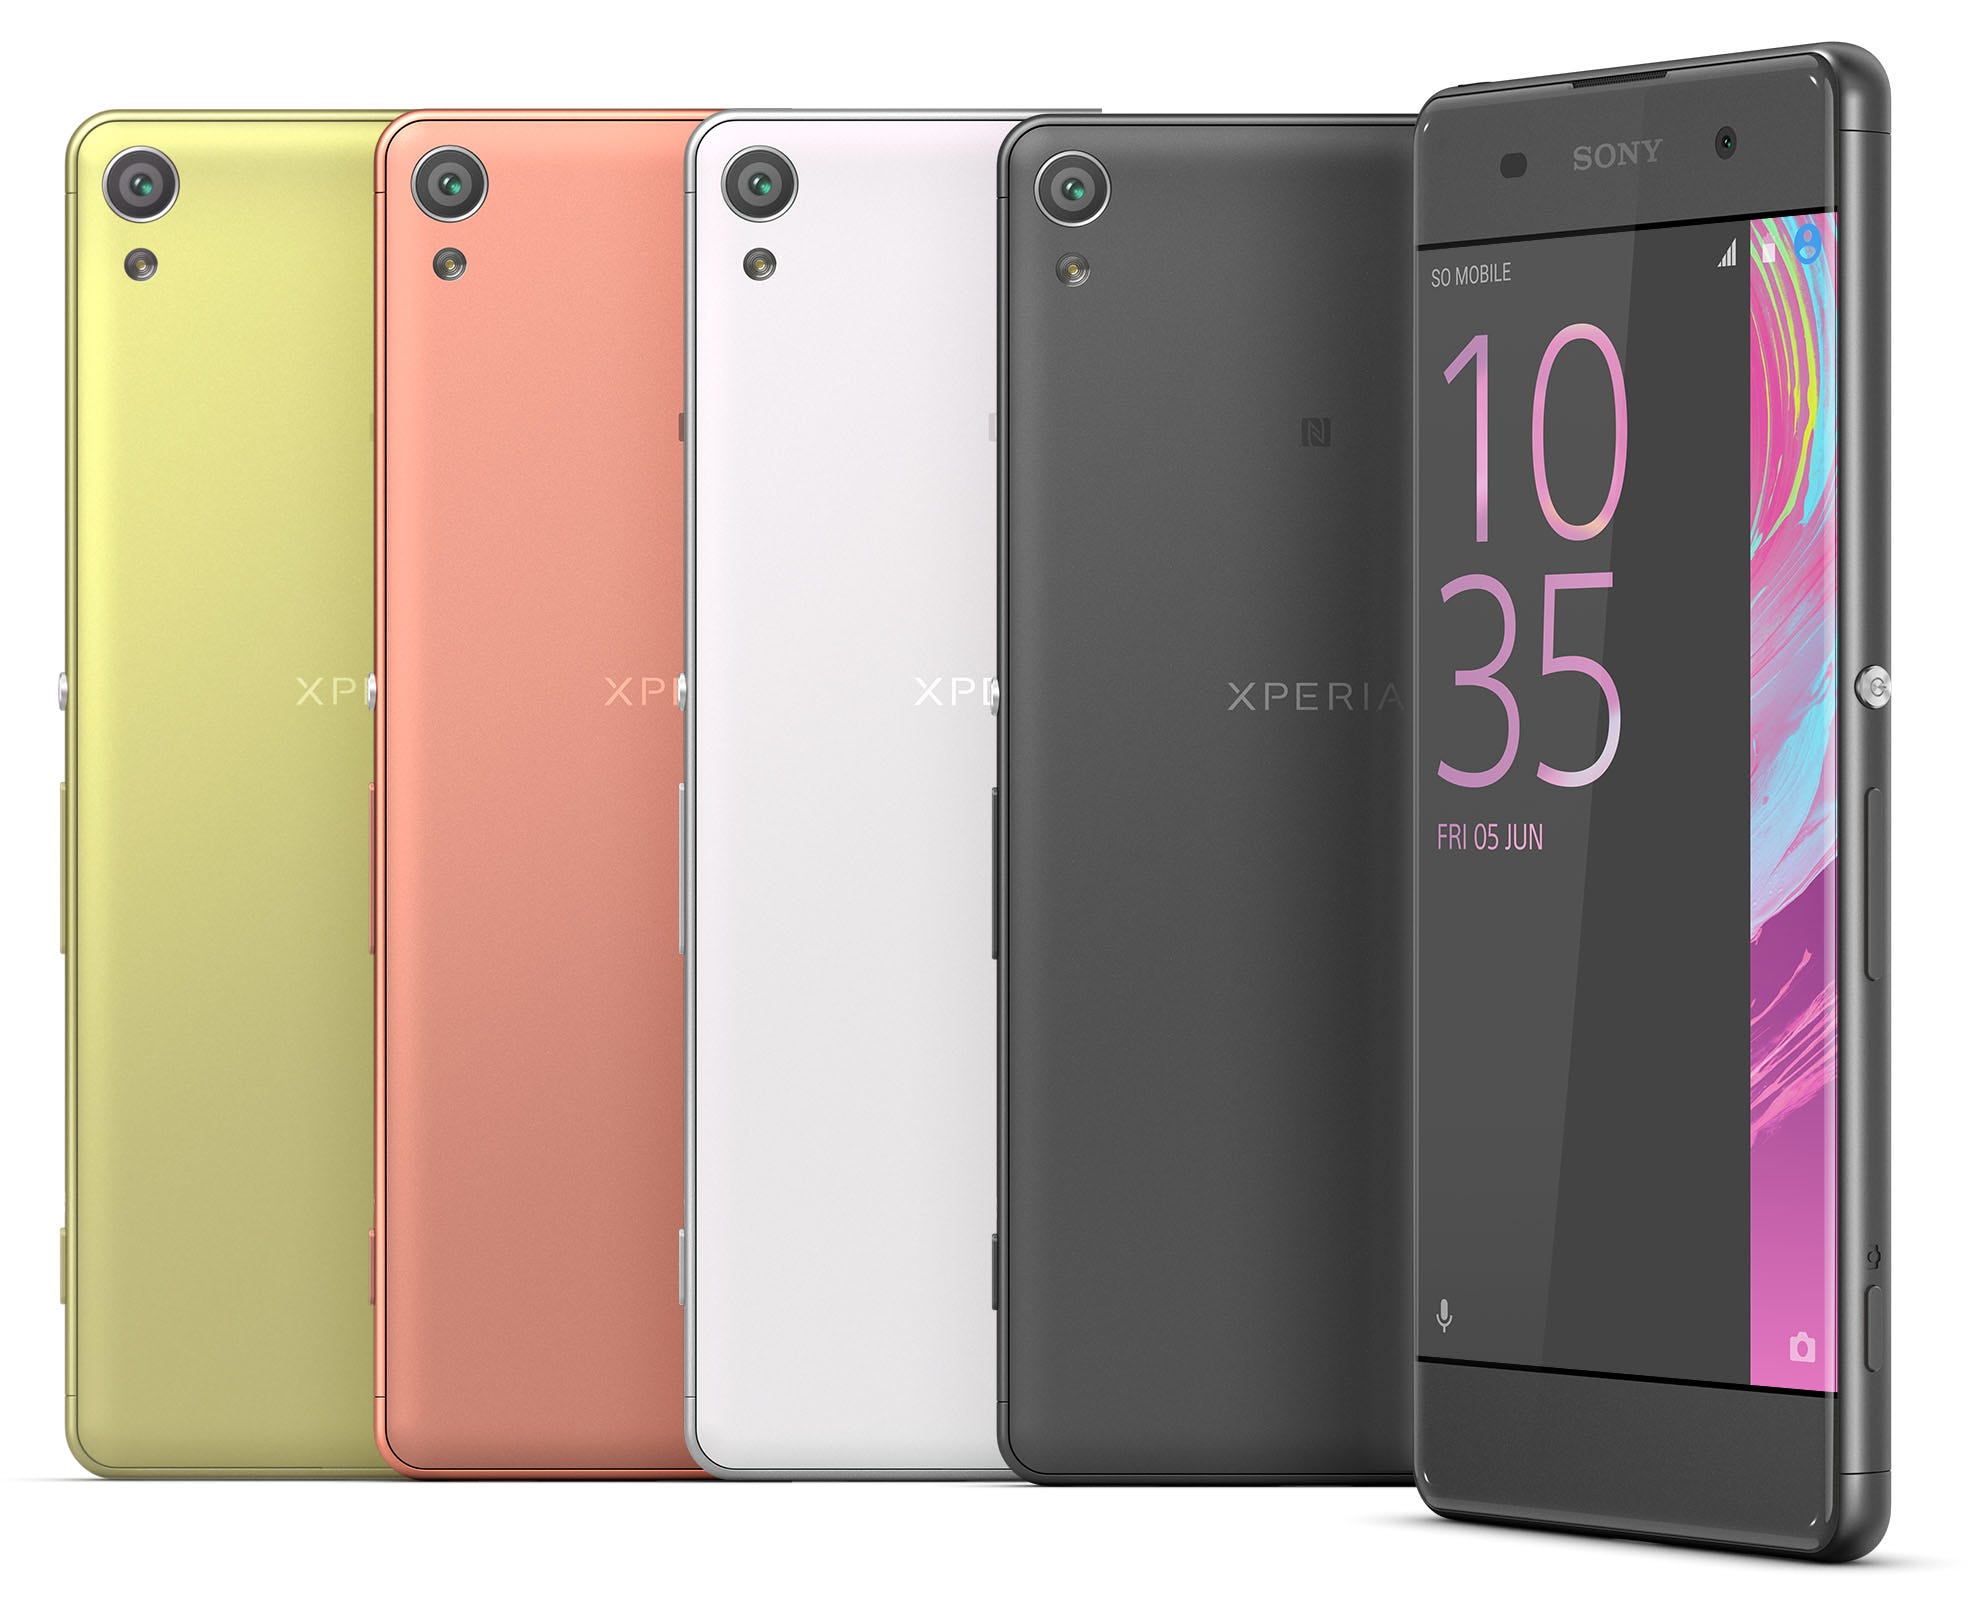 Sony Xperia XA color options and photo gallery | by Sohrab Osati | Sony  Reconsidered